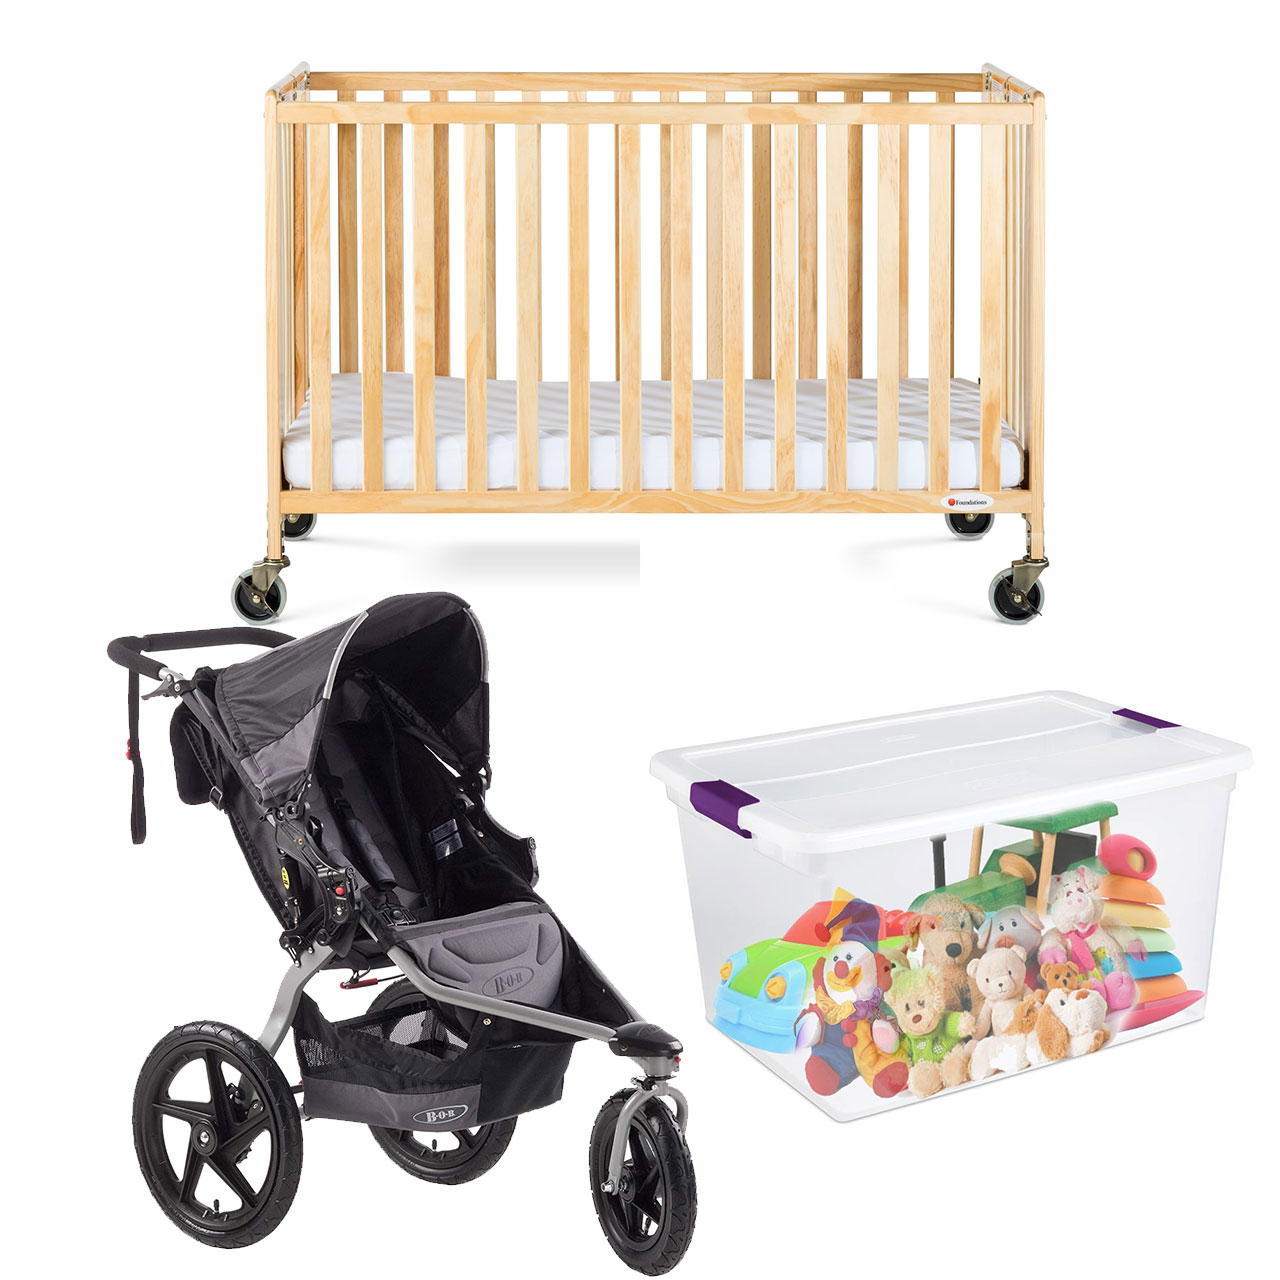 Full-Size Crib and Single Stroller with Engaging Toys for Your Baby